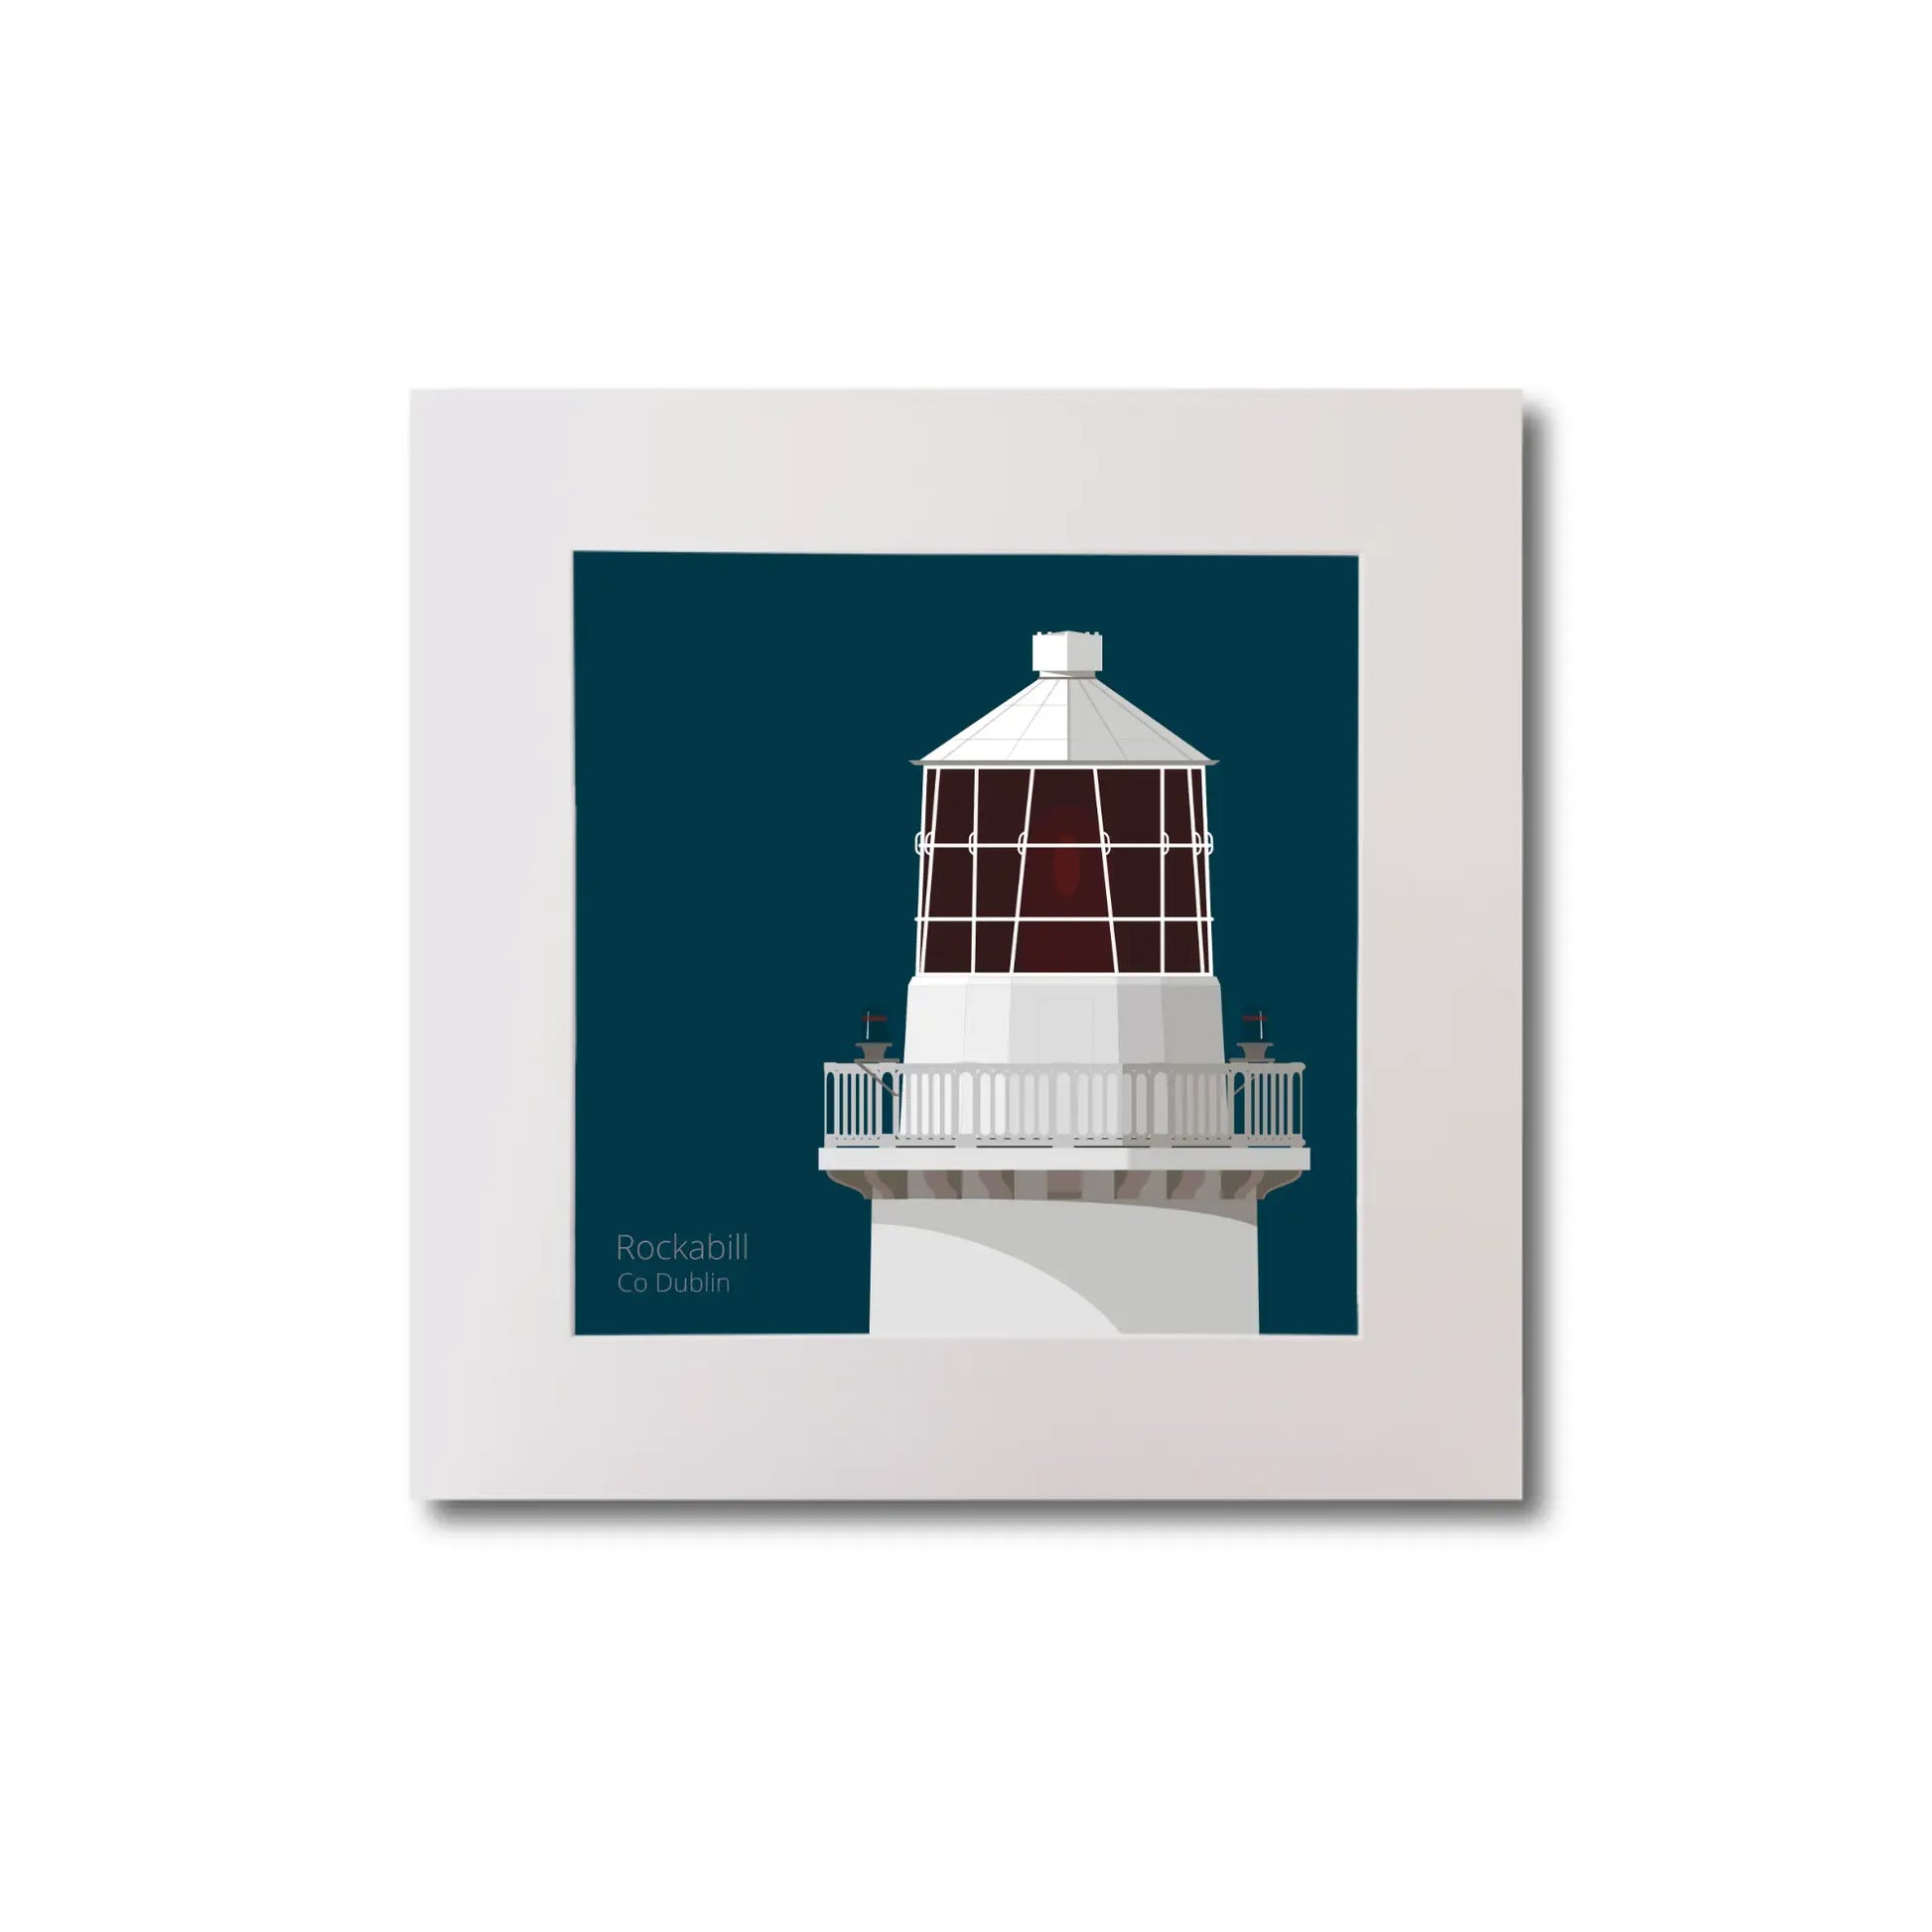 Illustration of Rockabill lighthouse on a midnight blue background, mounted and measuring 20x20cm.